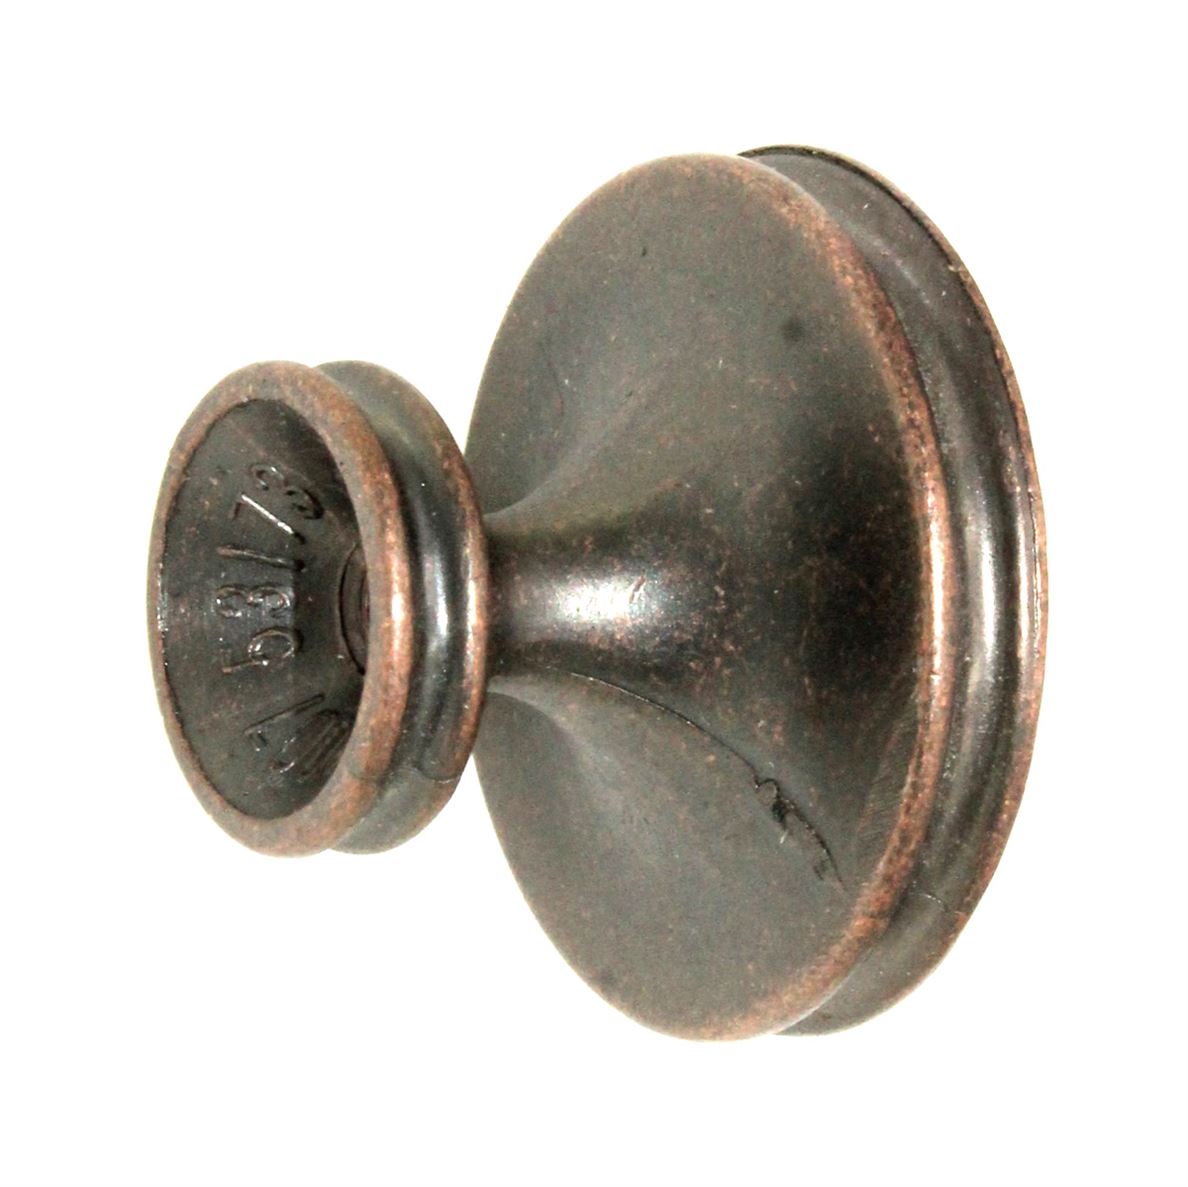 Hickory Hardware Mountain Lodge Antique Copper 1 3/8" Hammered Knob P3061-DAC